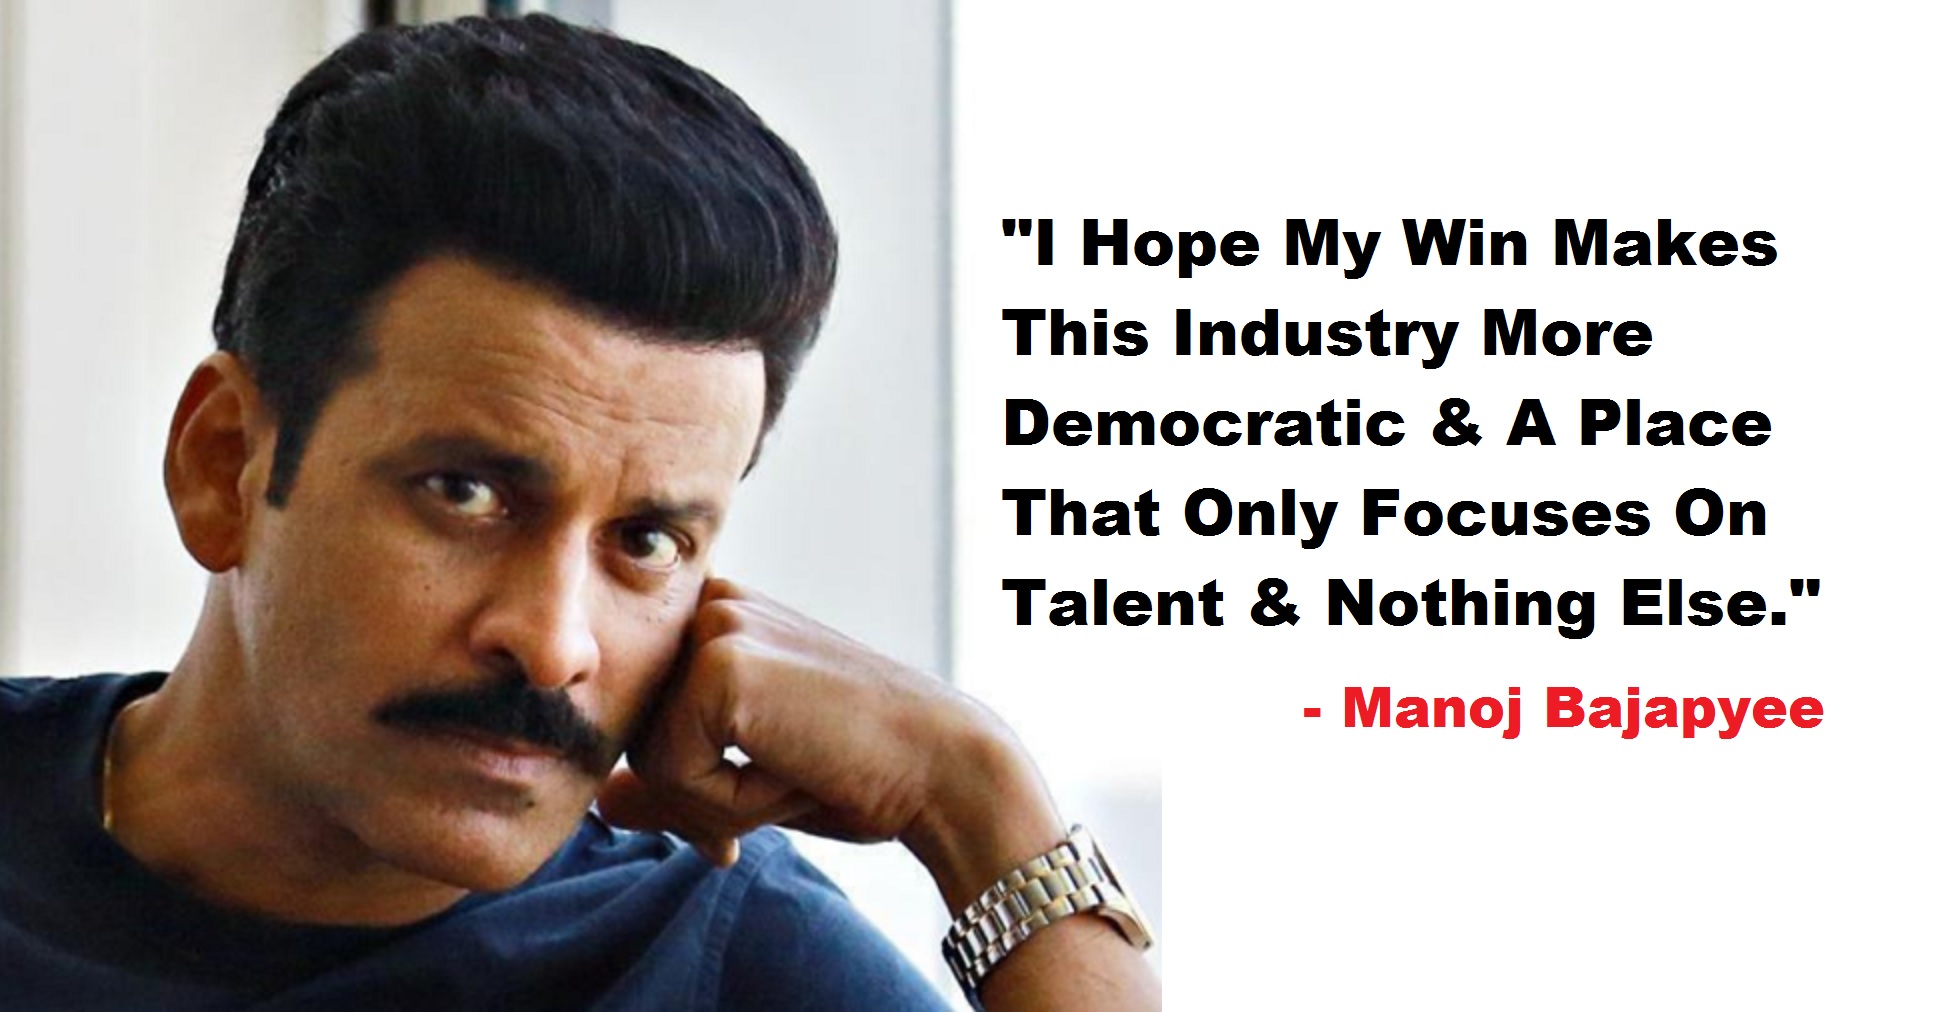 After Winning National Award, Manoj Bajpayee Dedicates It To Those Who Made The Film Possible